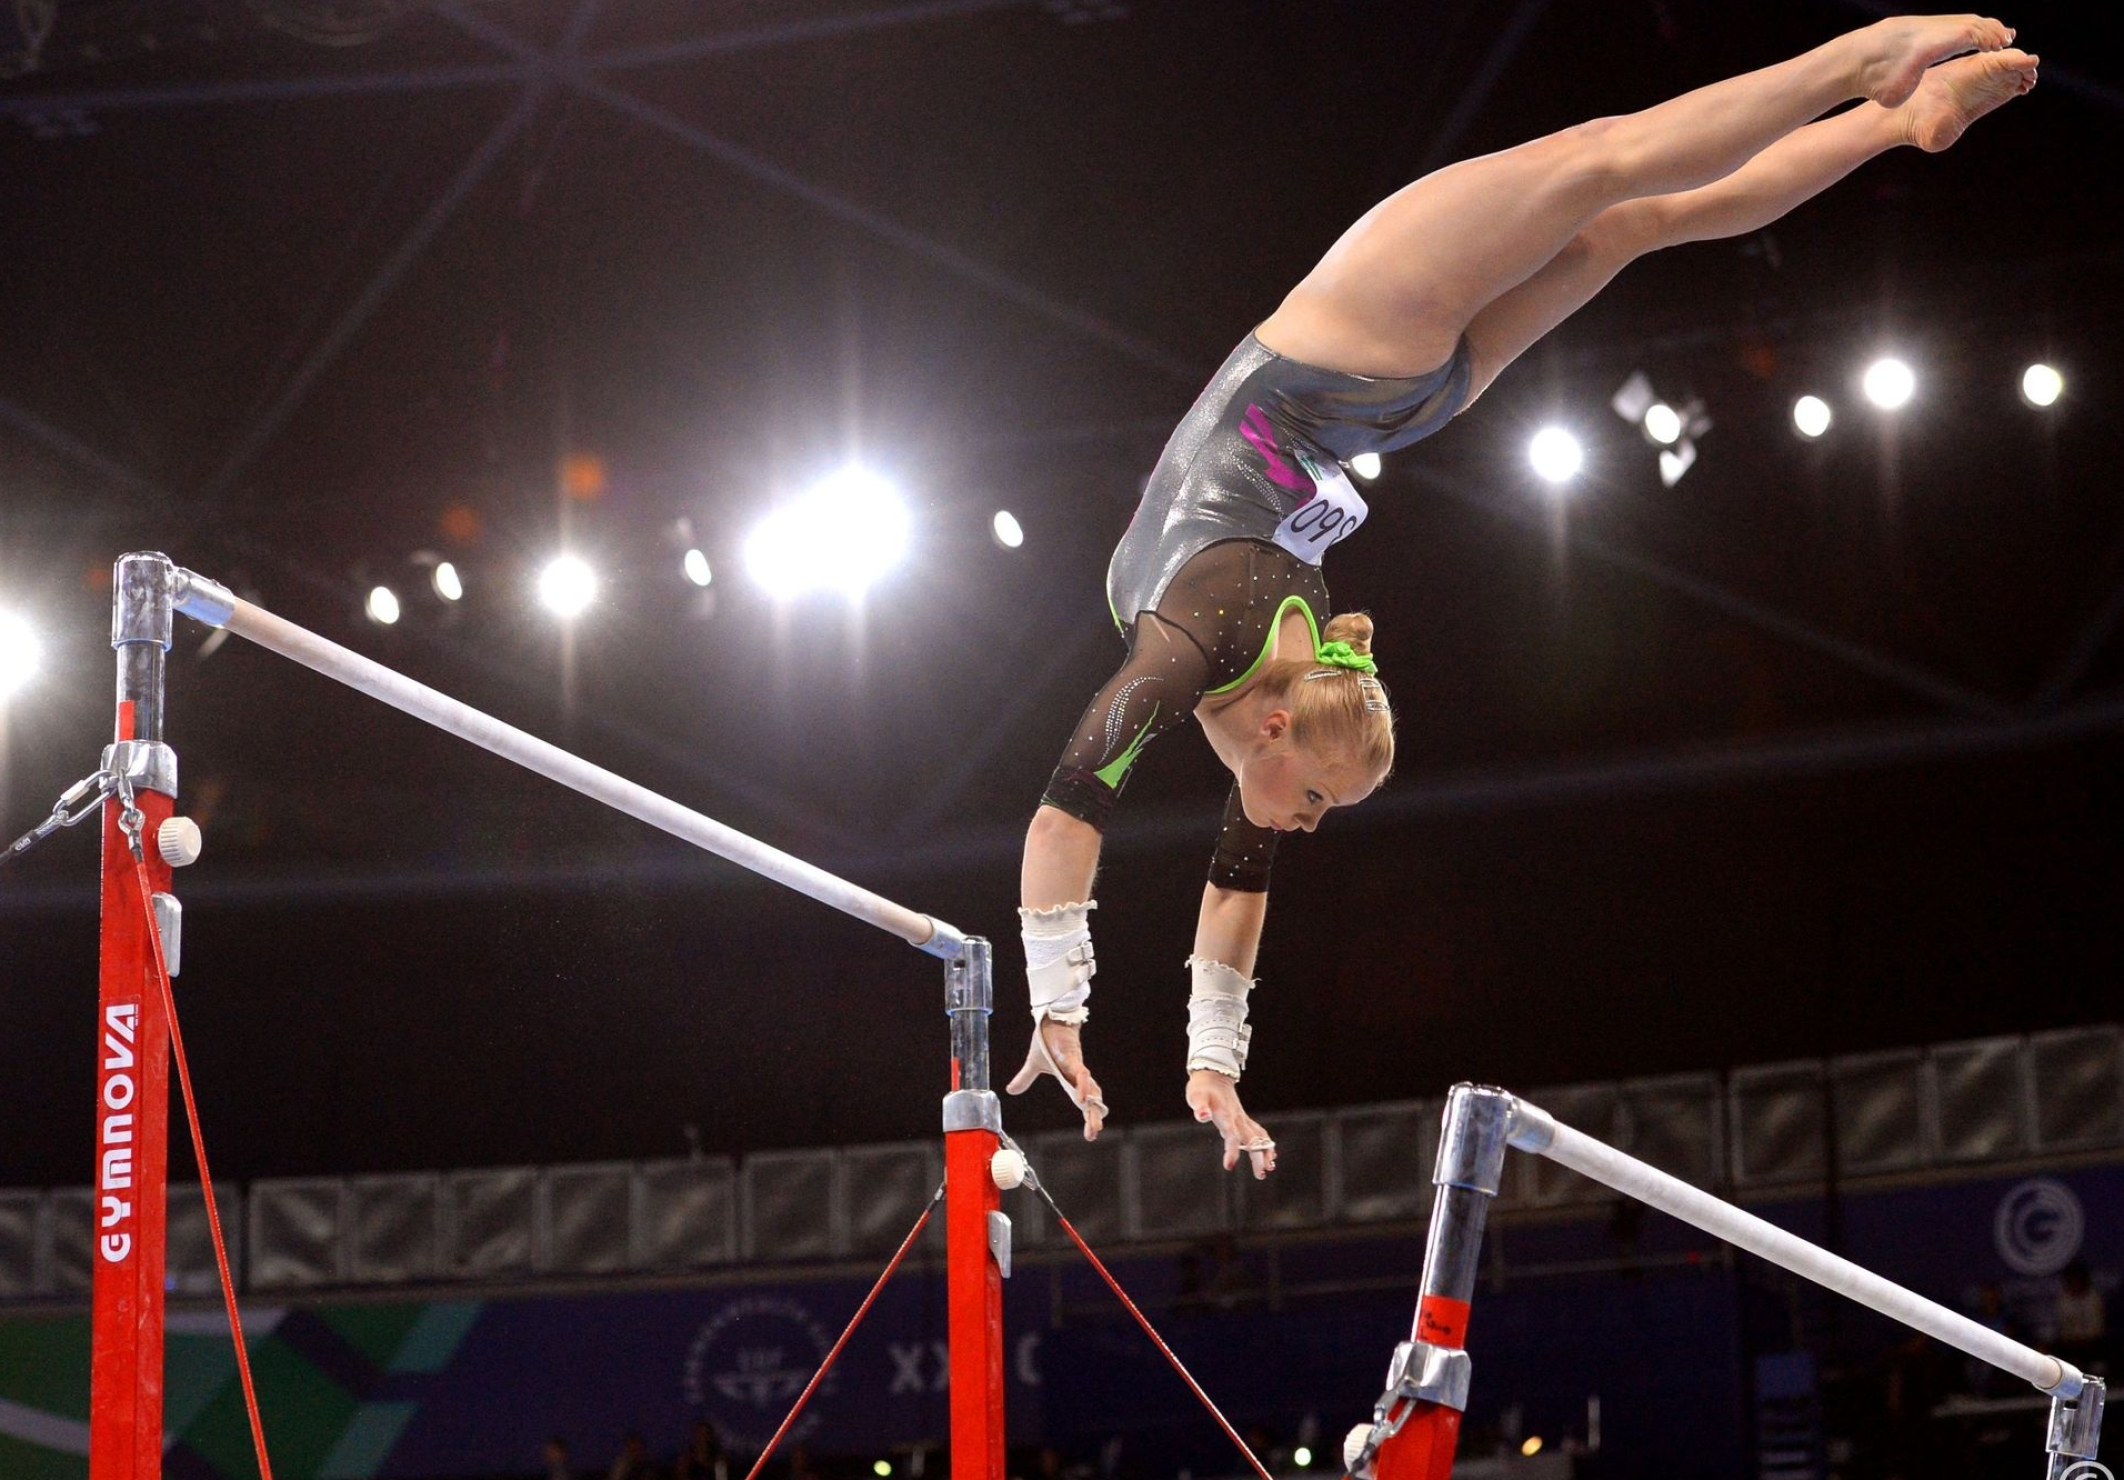 Uneven Bars: UB routine, Strength, jumping and swings, Flight element. 2130x1480 HD Wallpaper.